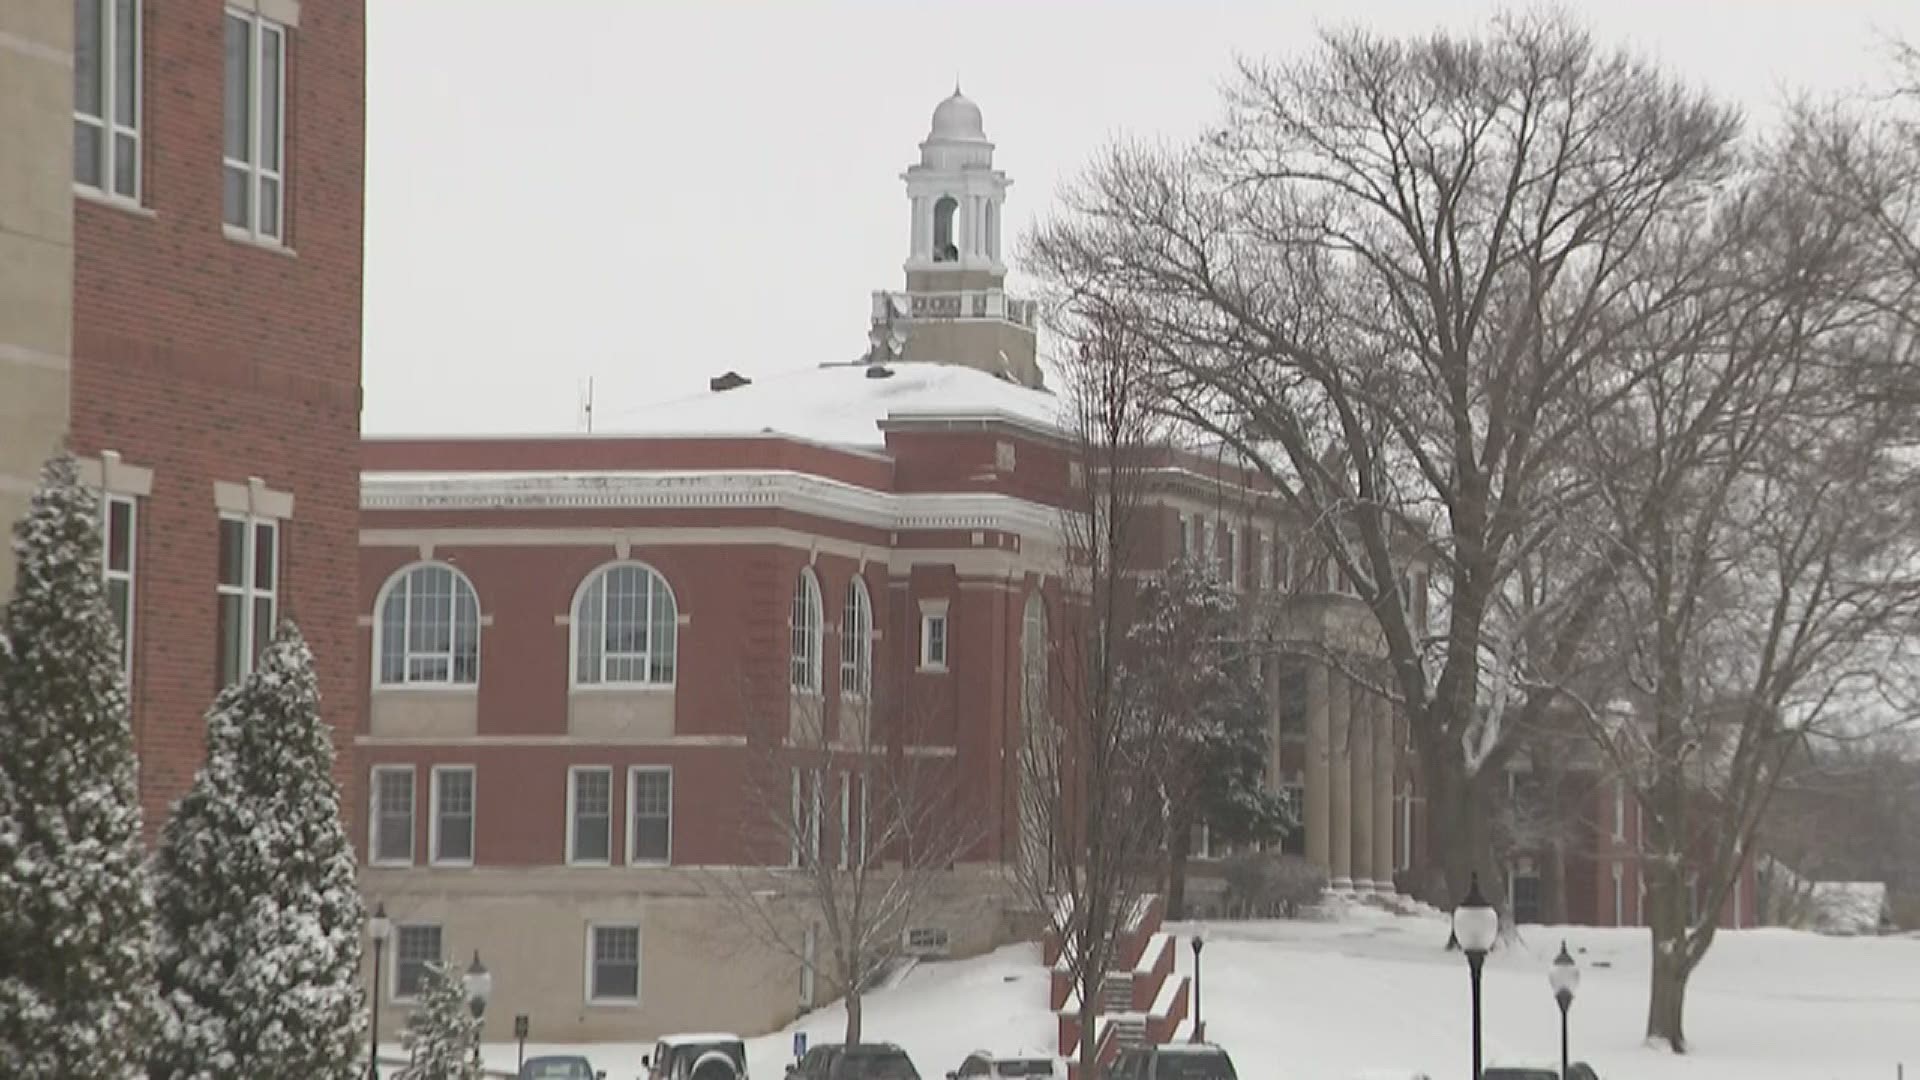 Partnering with SHIELD Illinois to conduct mass testing on students and staff, Monmouth College says campus community test positivity rate was just 0.5% this weekend